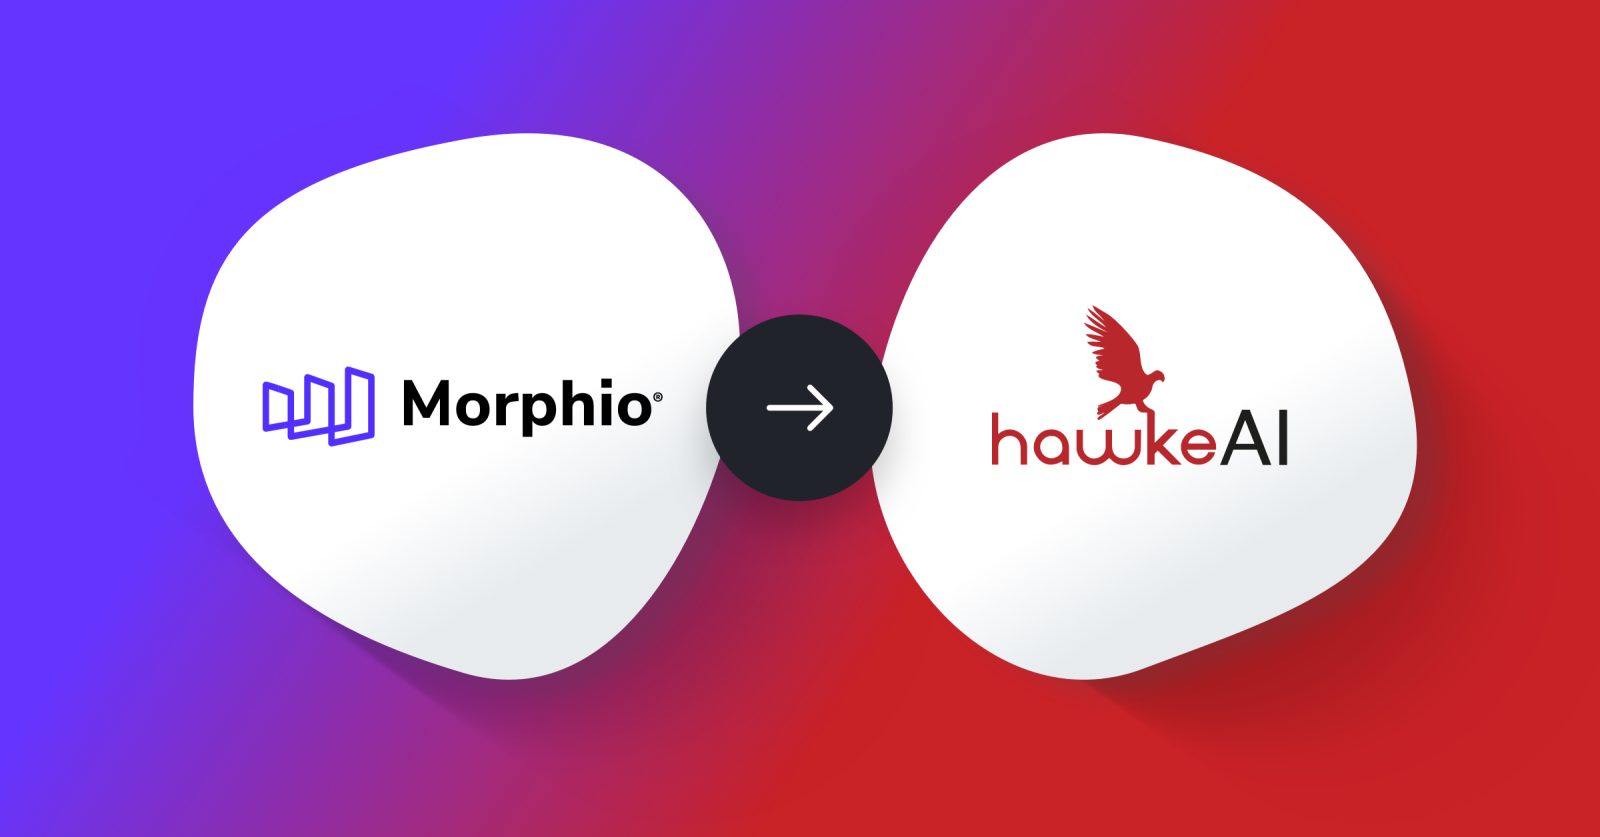 Hawke Acquires Morphio to Bolster the Launch of hawke.ai Featured Image